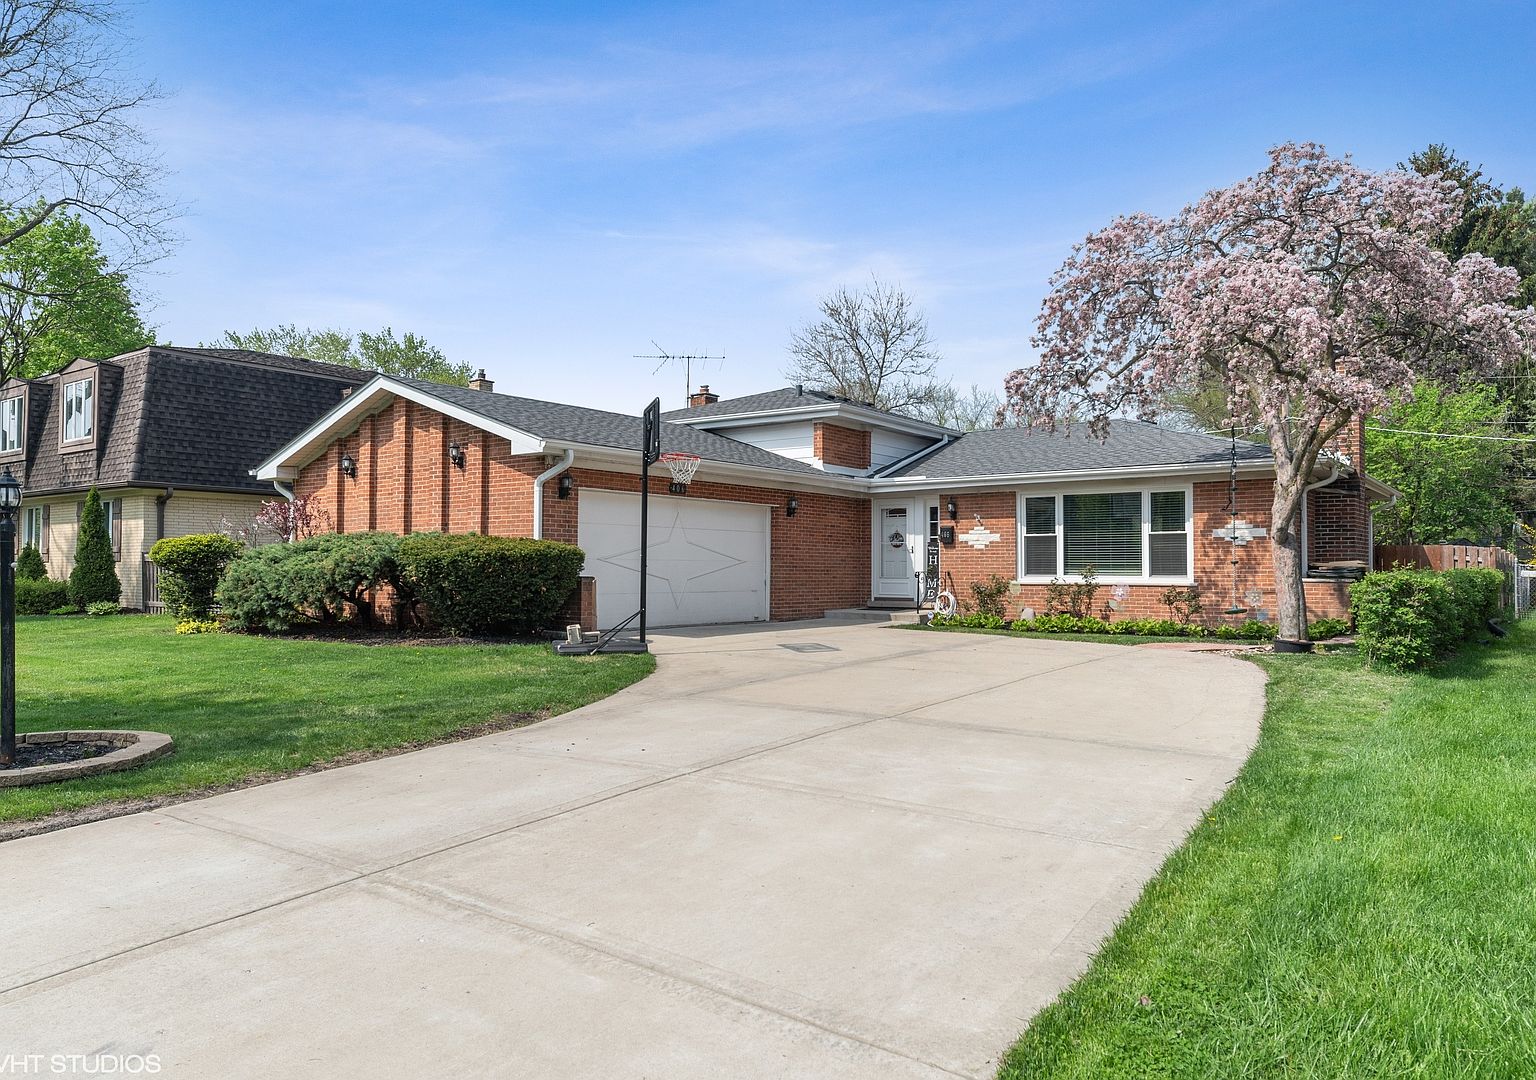 406 N Waterman Ave, Arlington Heights, IL 60004 | Zillow